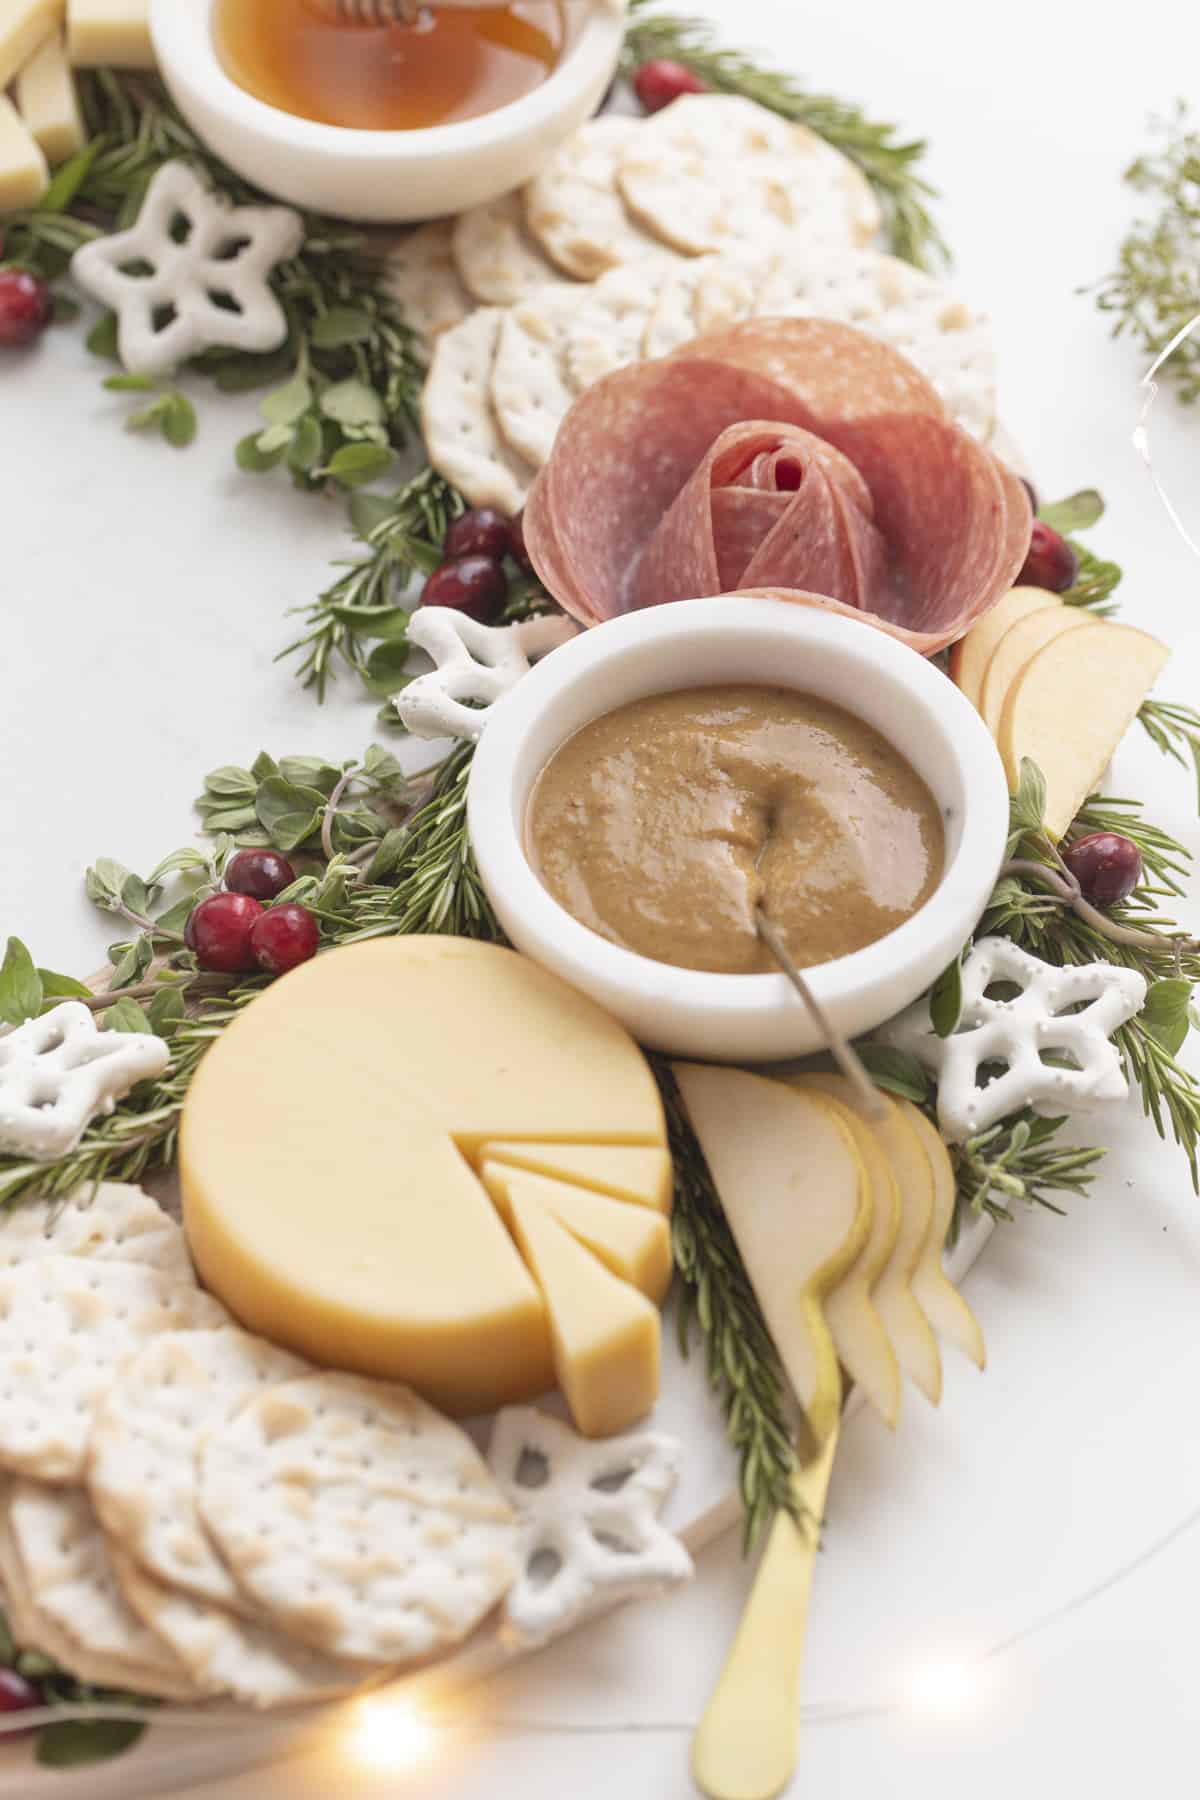 mustard in a bowl next to sliced cheese and salami rose on a charcuterie wreath